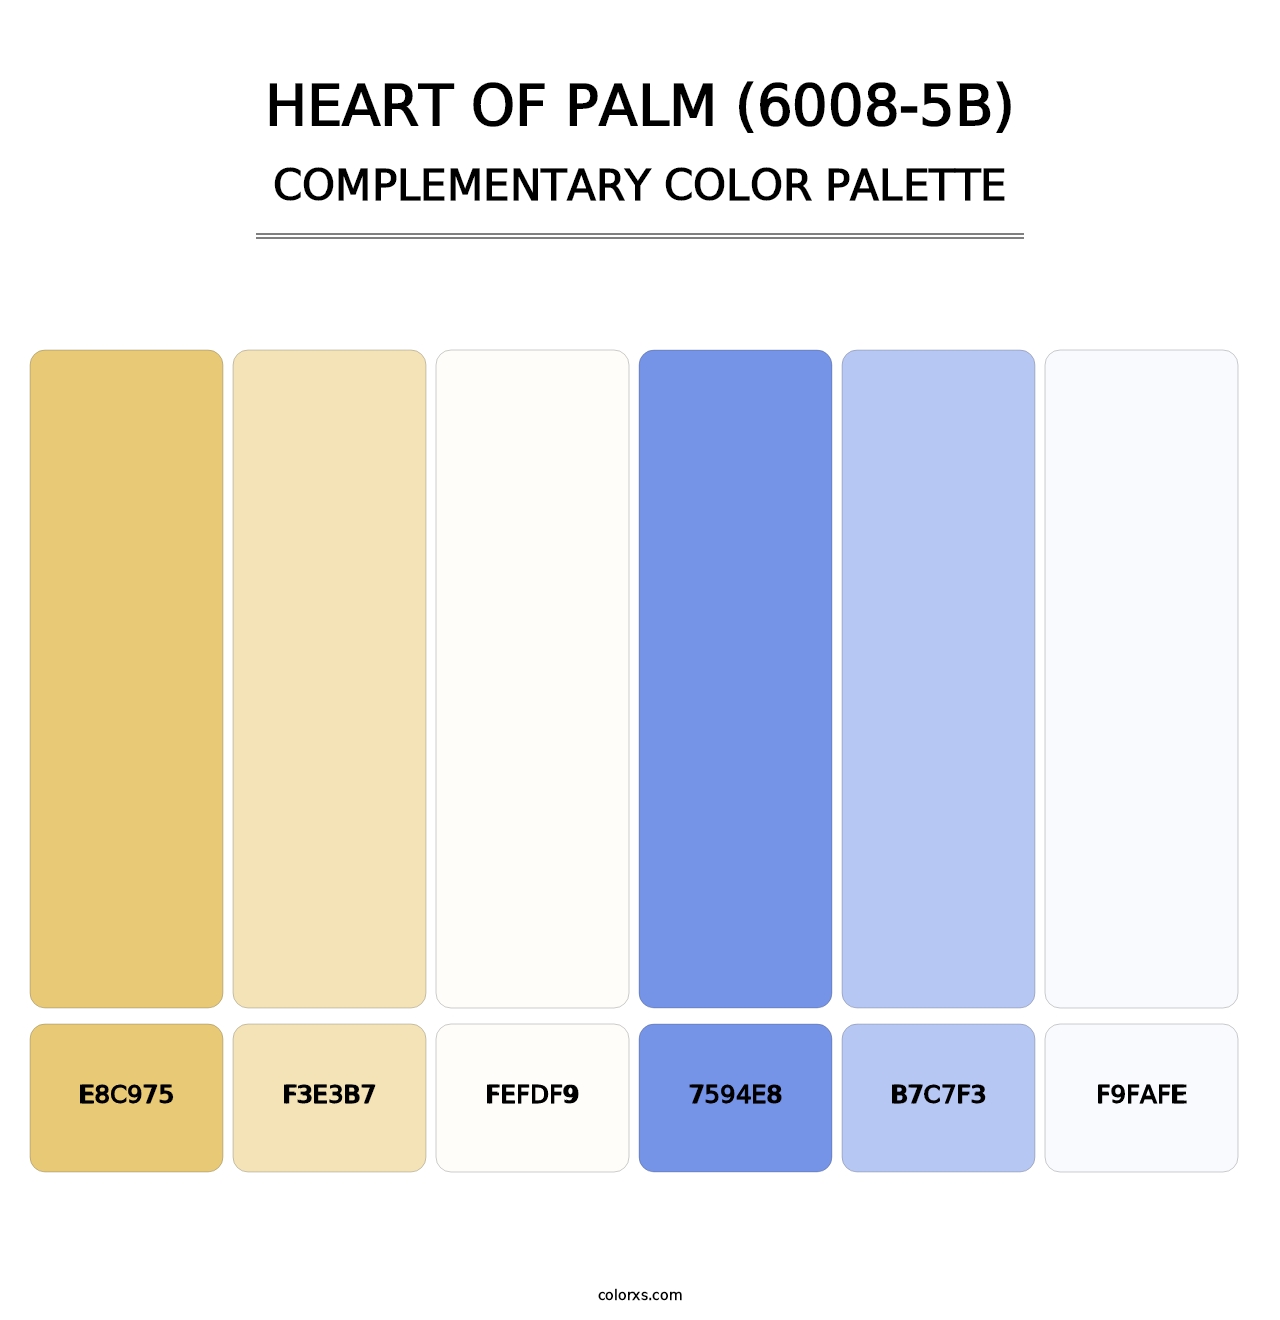 Heart of Palm (6008-5B) - Complementary Color Palette